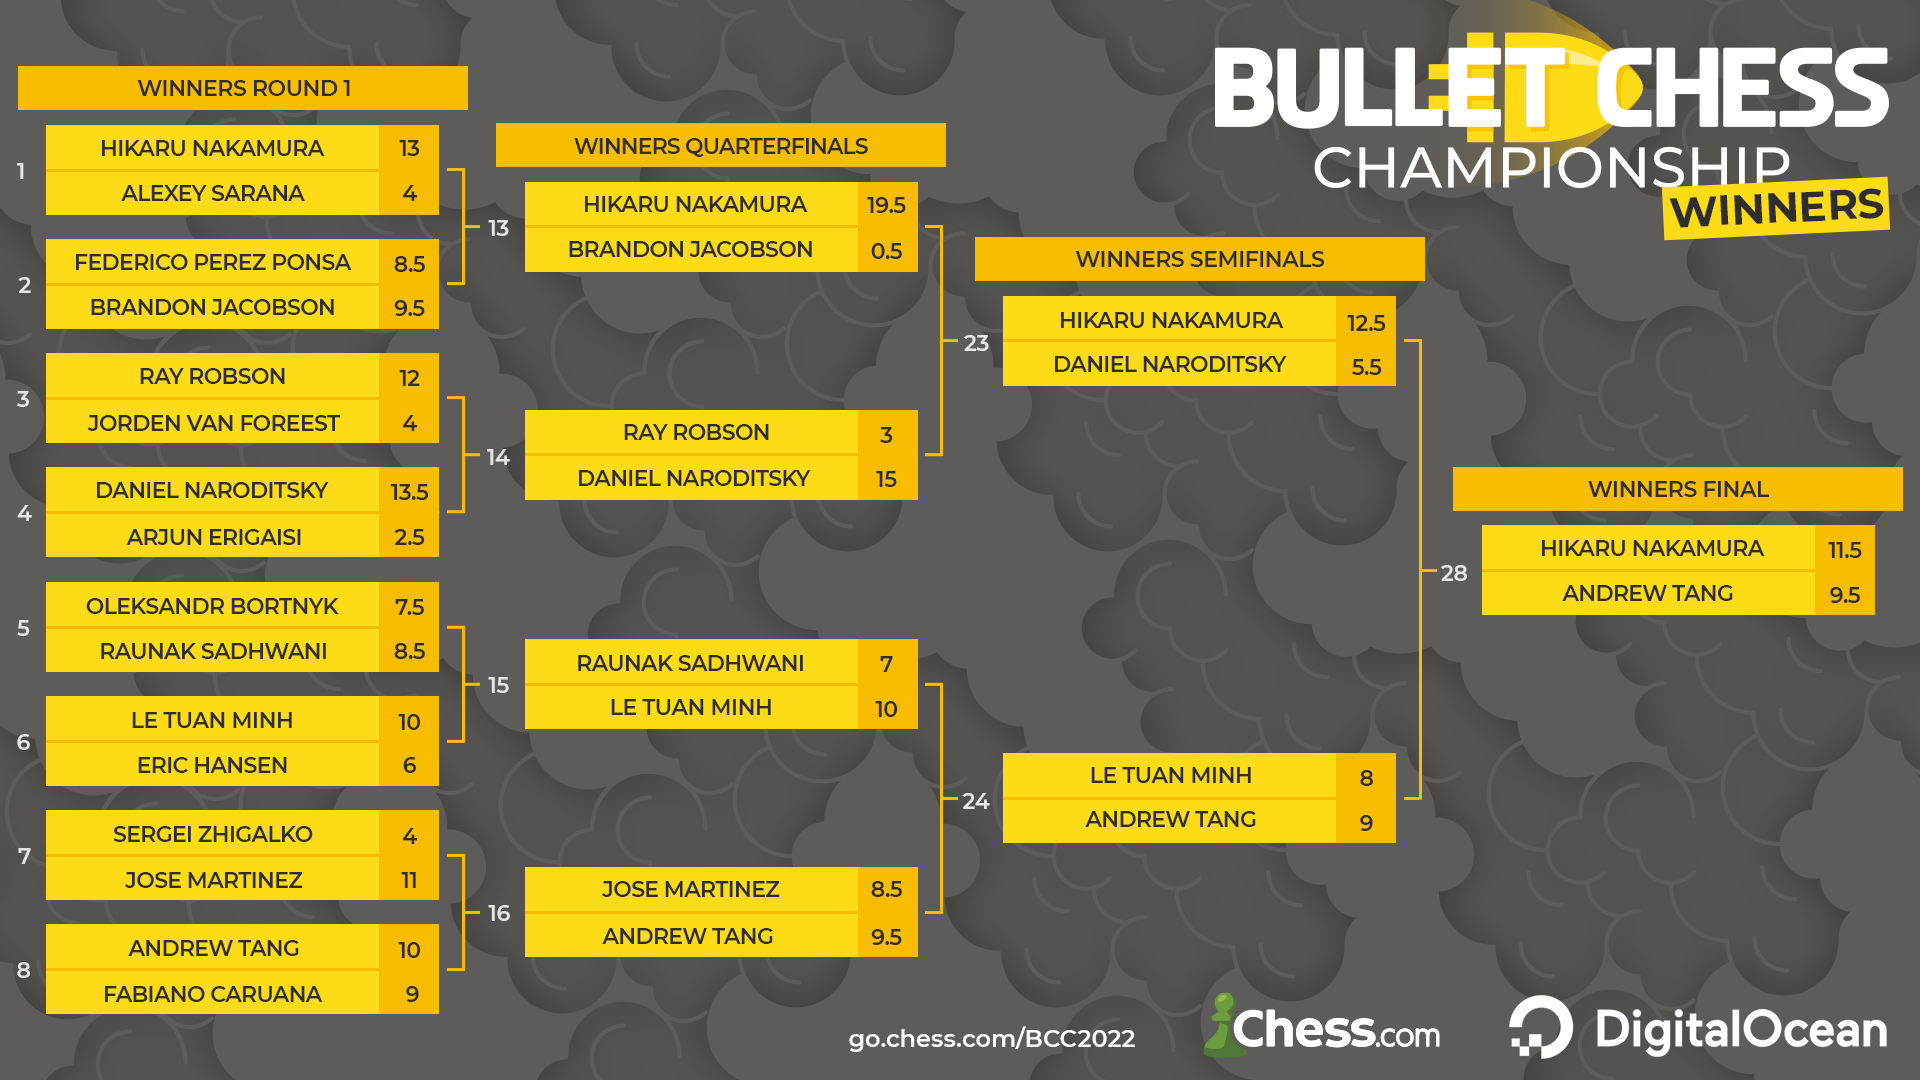 2022 Bullet Chess Championship All The Information